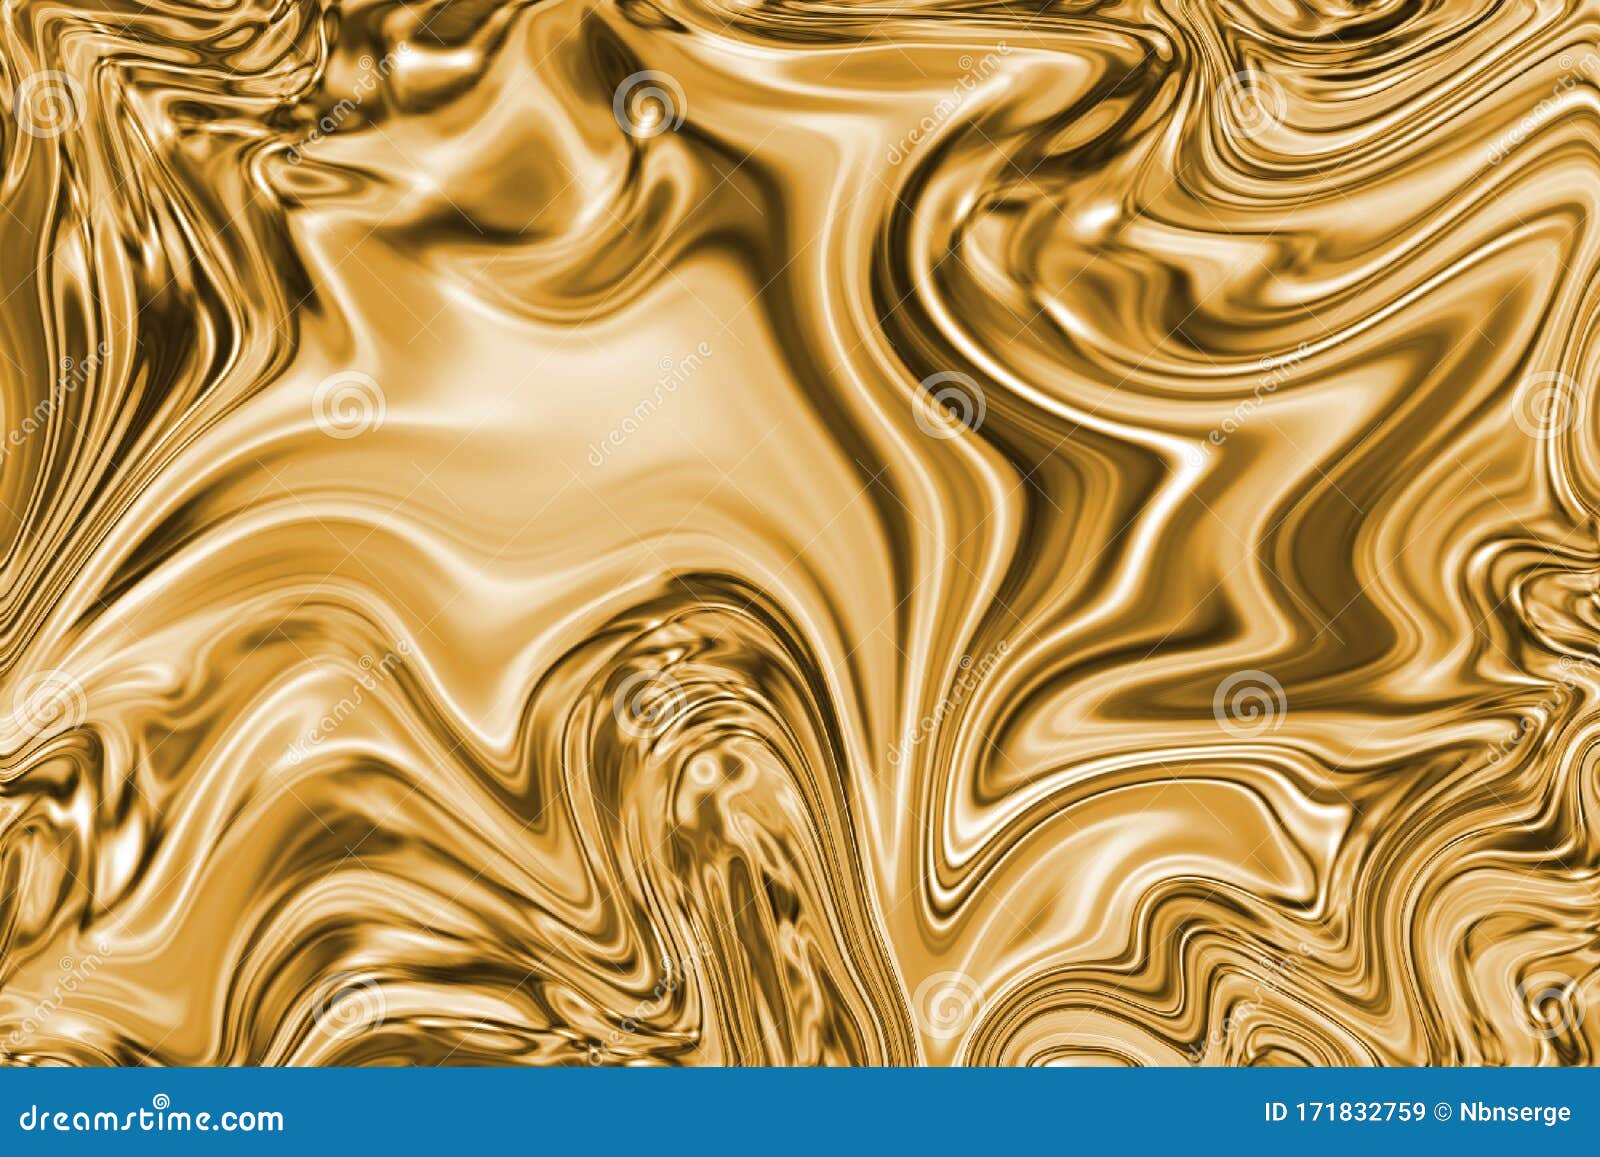 Pure Gold or Yellow Texture Background for Wallpaper, Decoration or Design  Works Stock Illustration - Illustration of wallpaper, yellow: 171832759